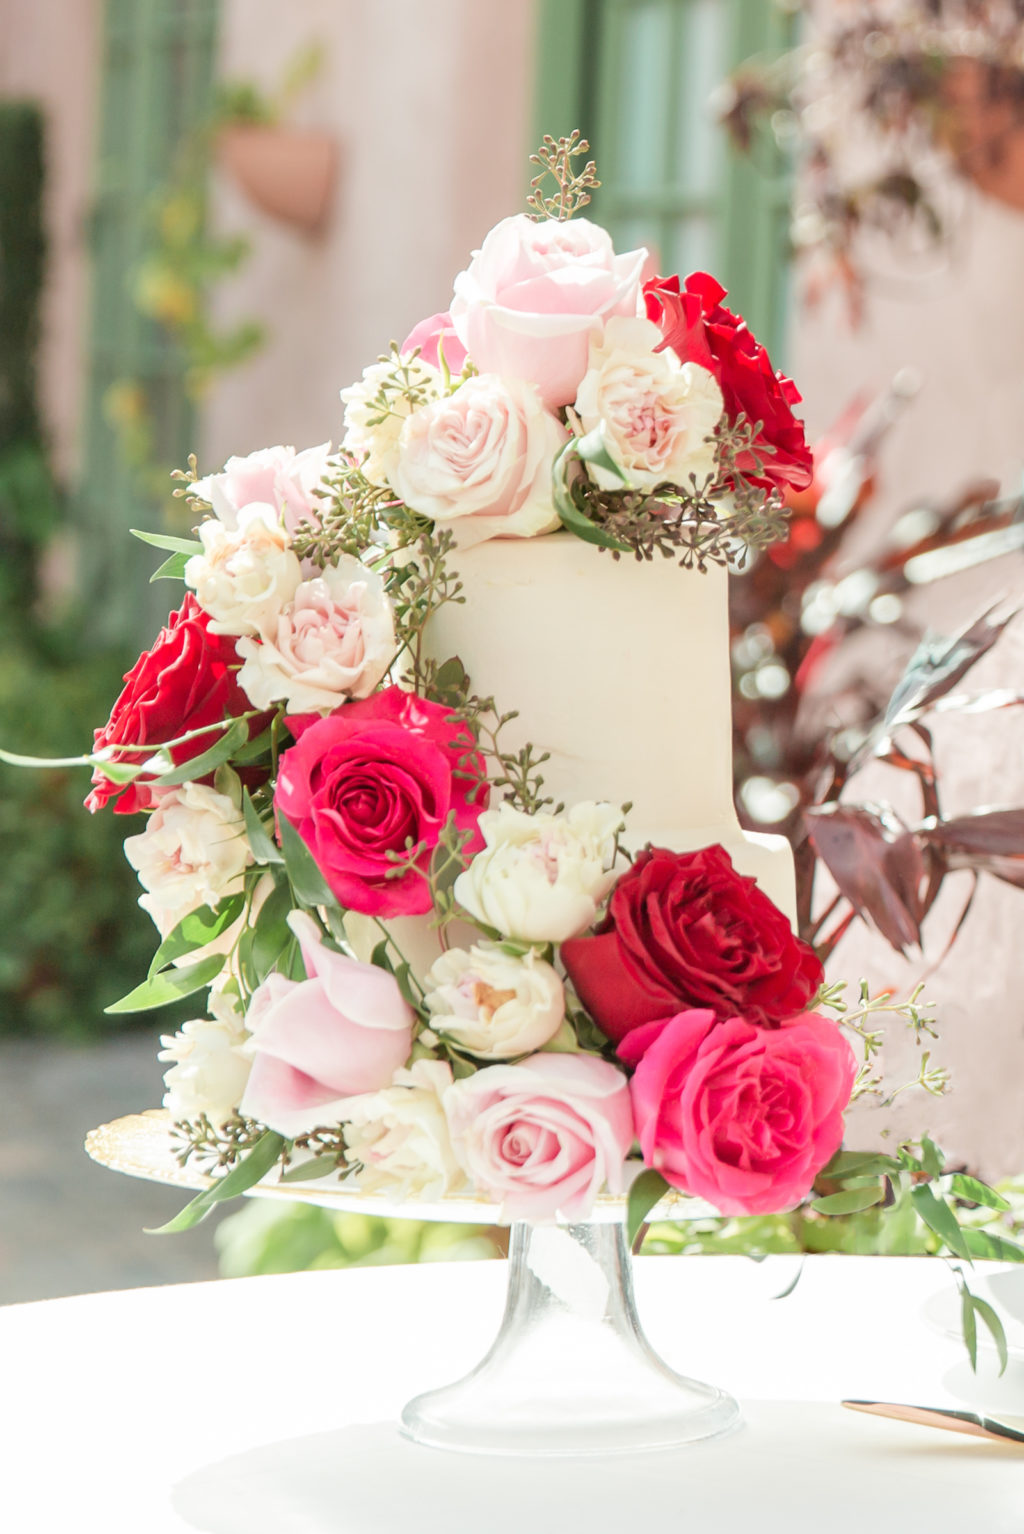 Elegant Garden Themed Wedding Reception Cake, White One Tier Wedding Cake with Blush, Hot Pink, Red and Ivory Roses Cascading Down Cake